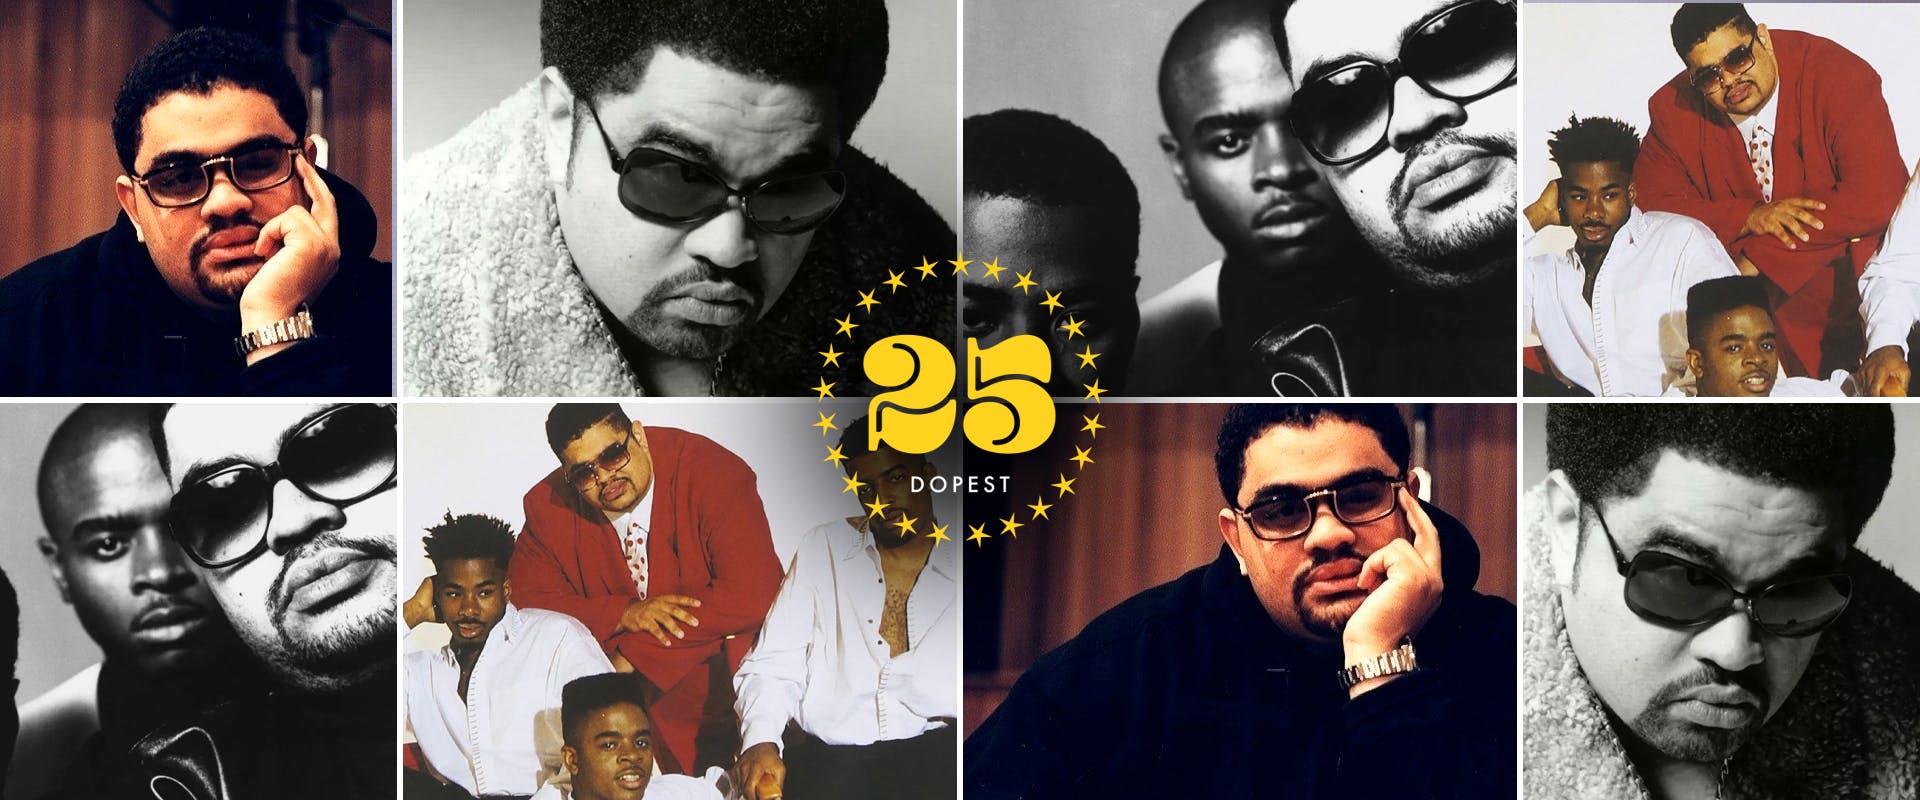 The Overweight Lover: The 25 Dopest Heavy D Songs